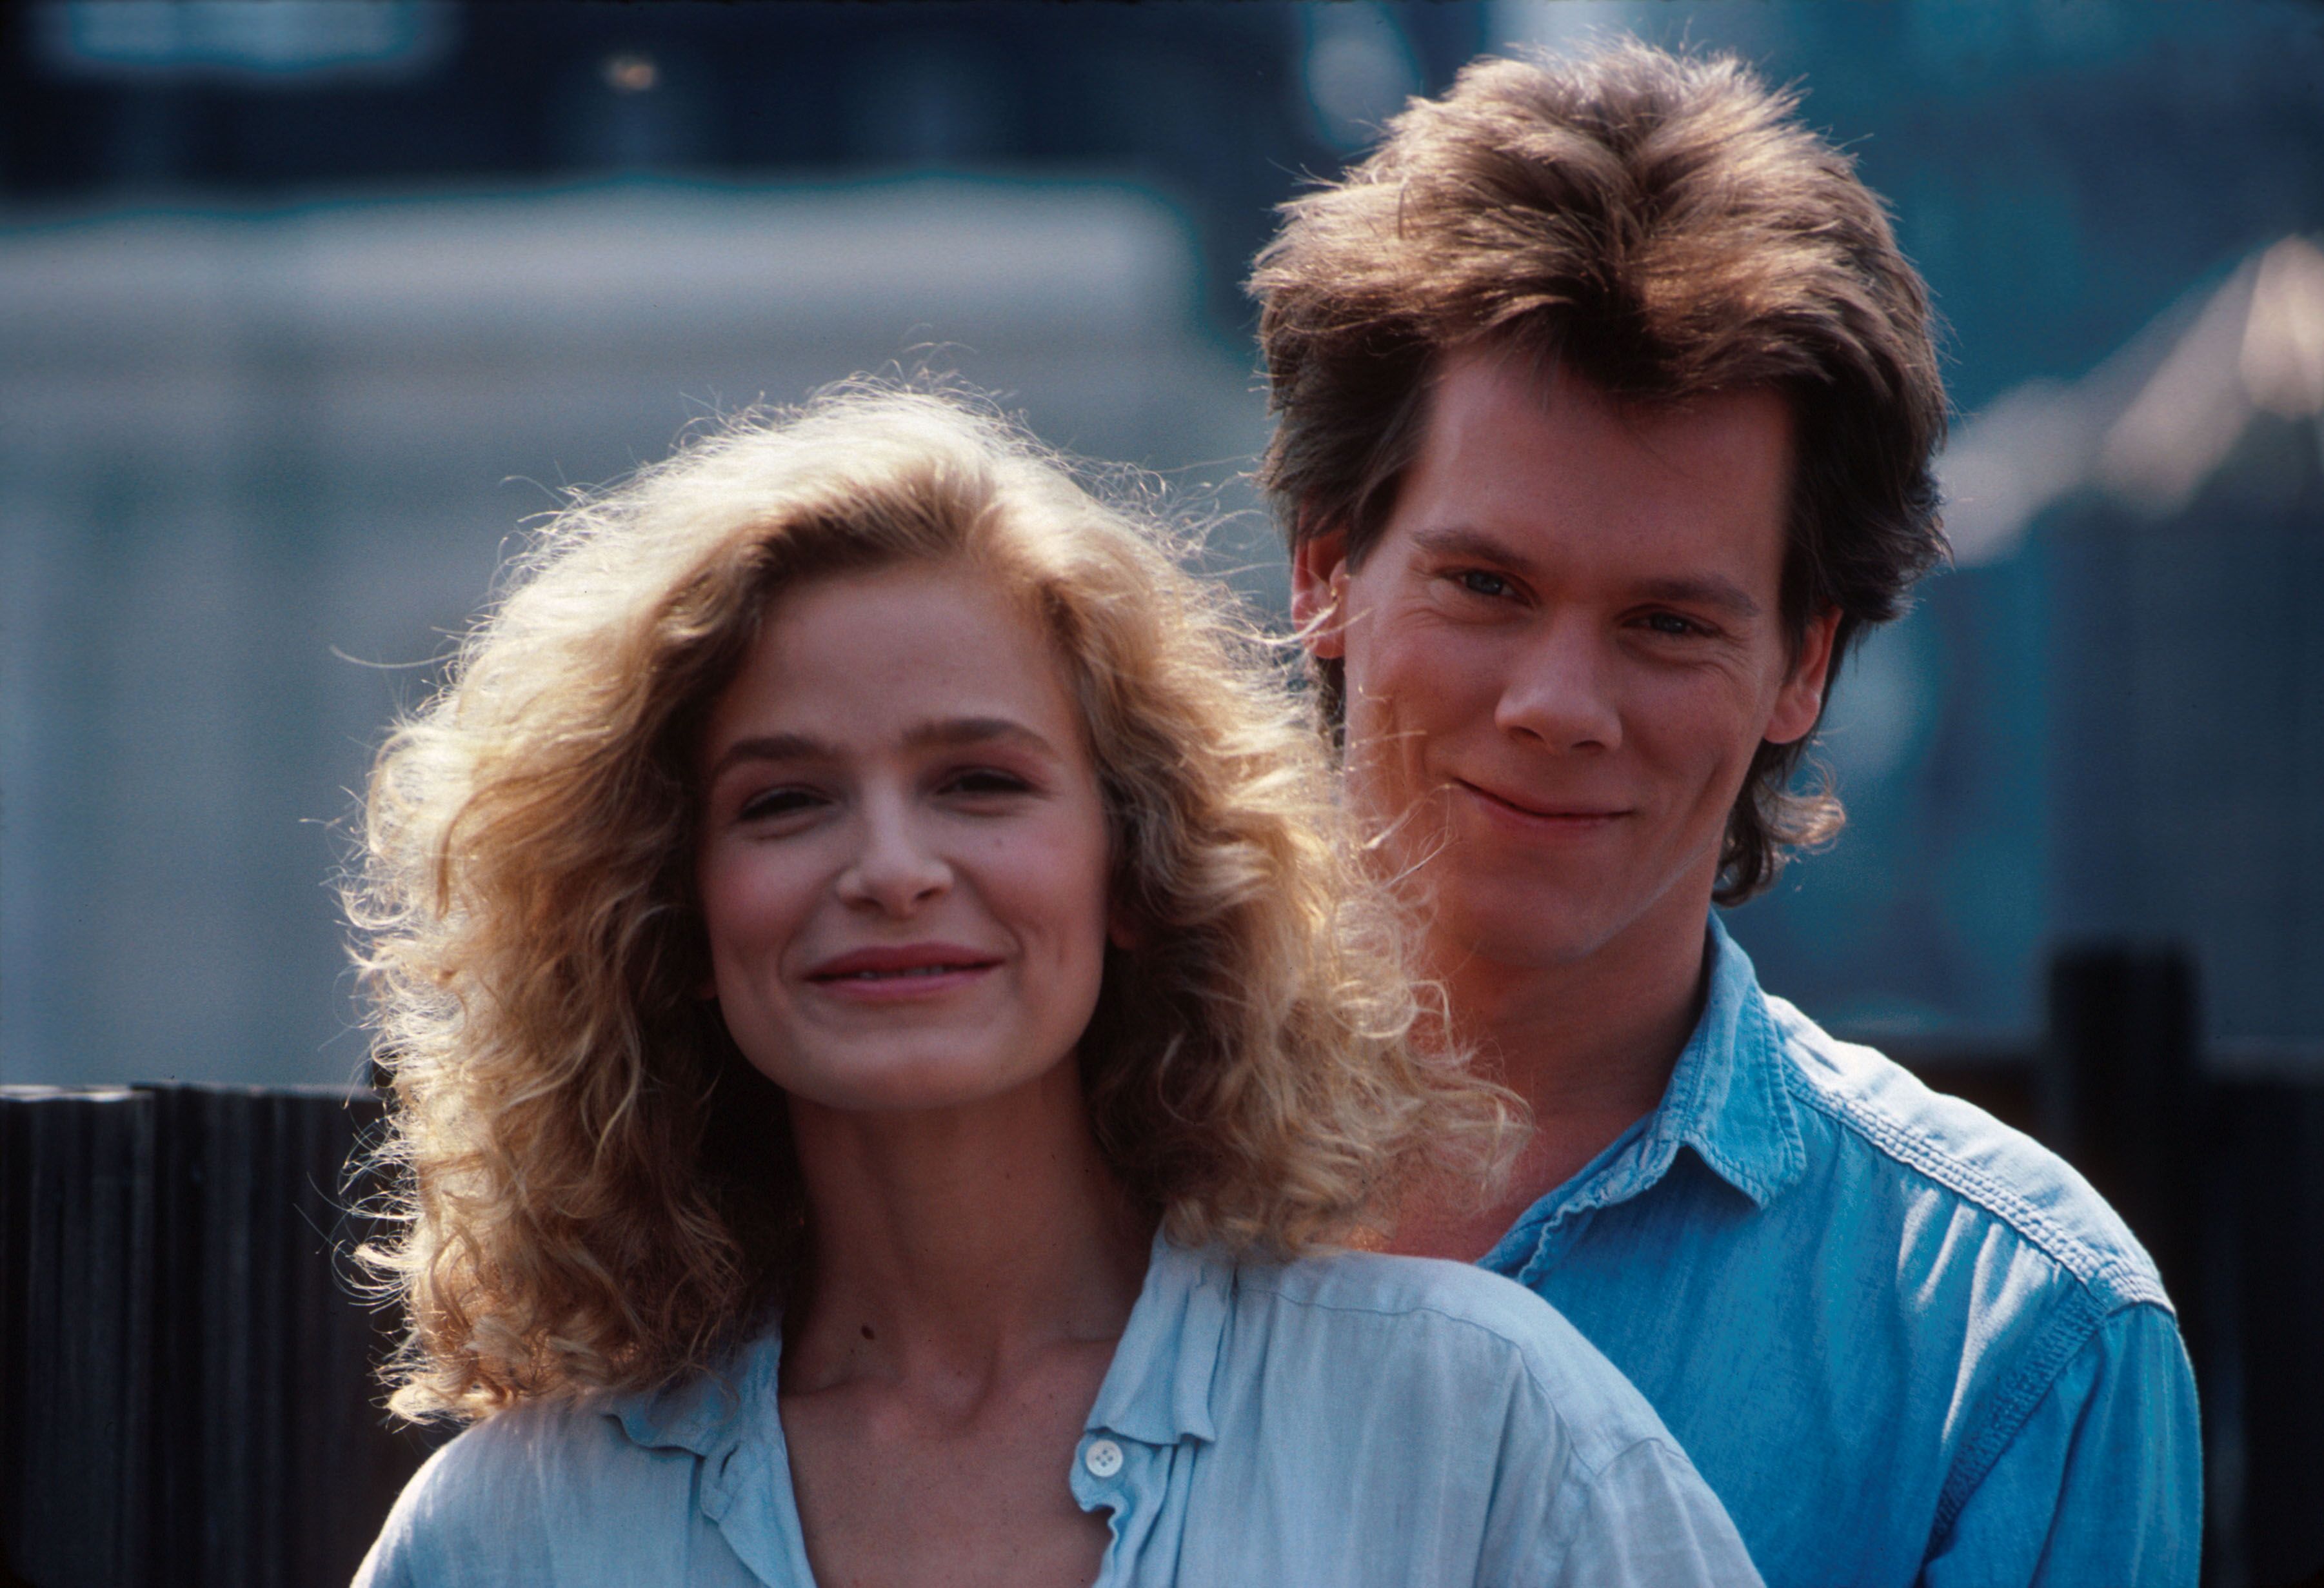 Kevin Bacon with Kyra Sedgwick on photo shoot in New York, August 1988. | Source: Getty Images